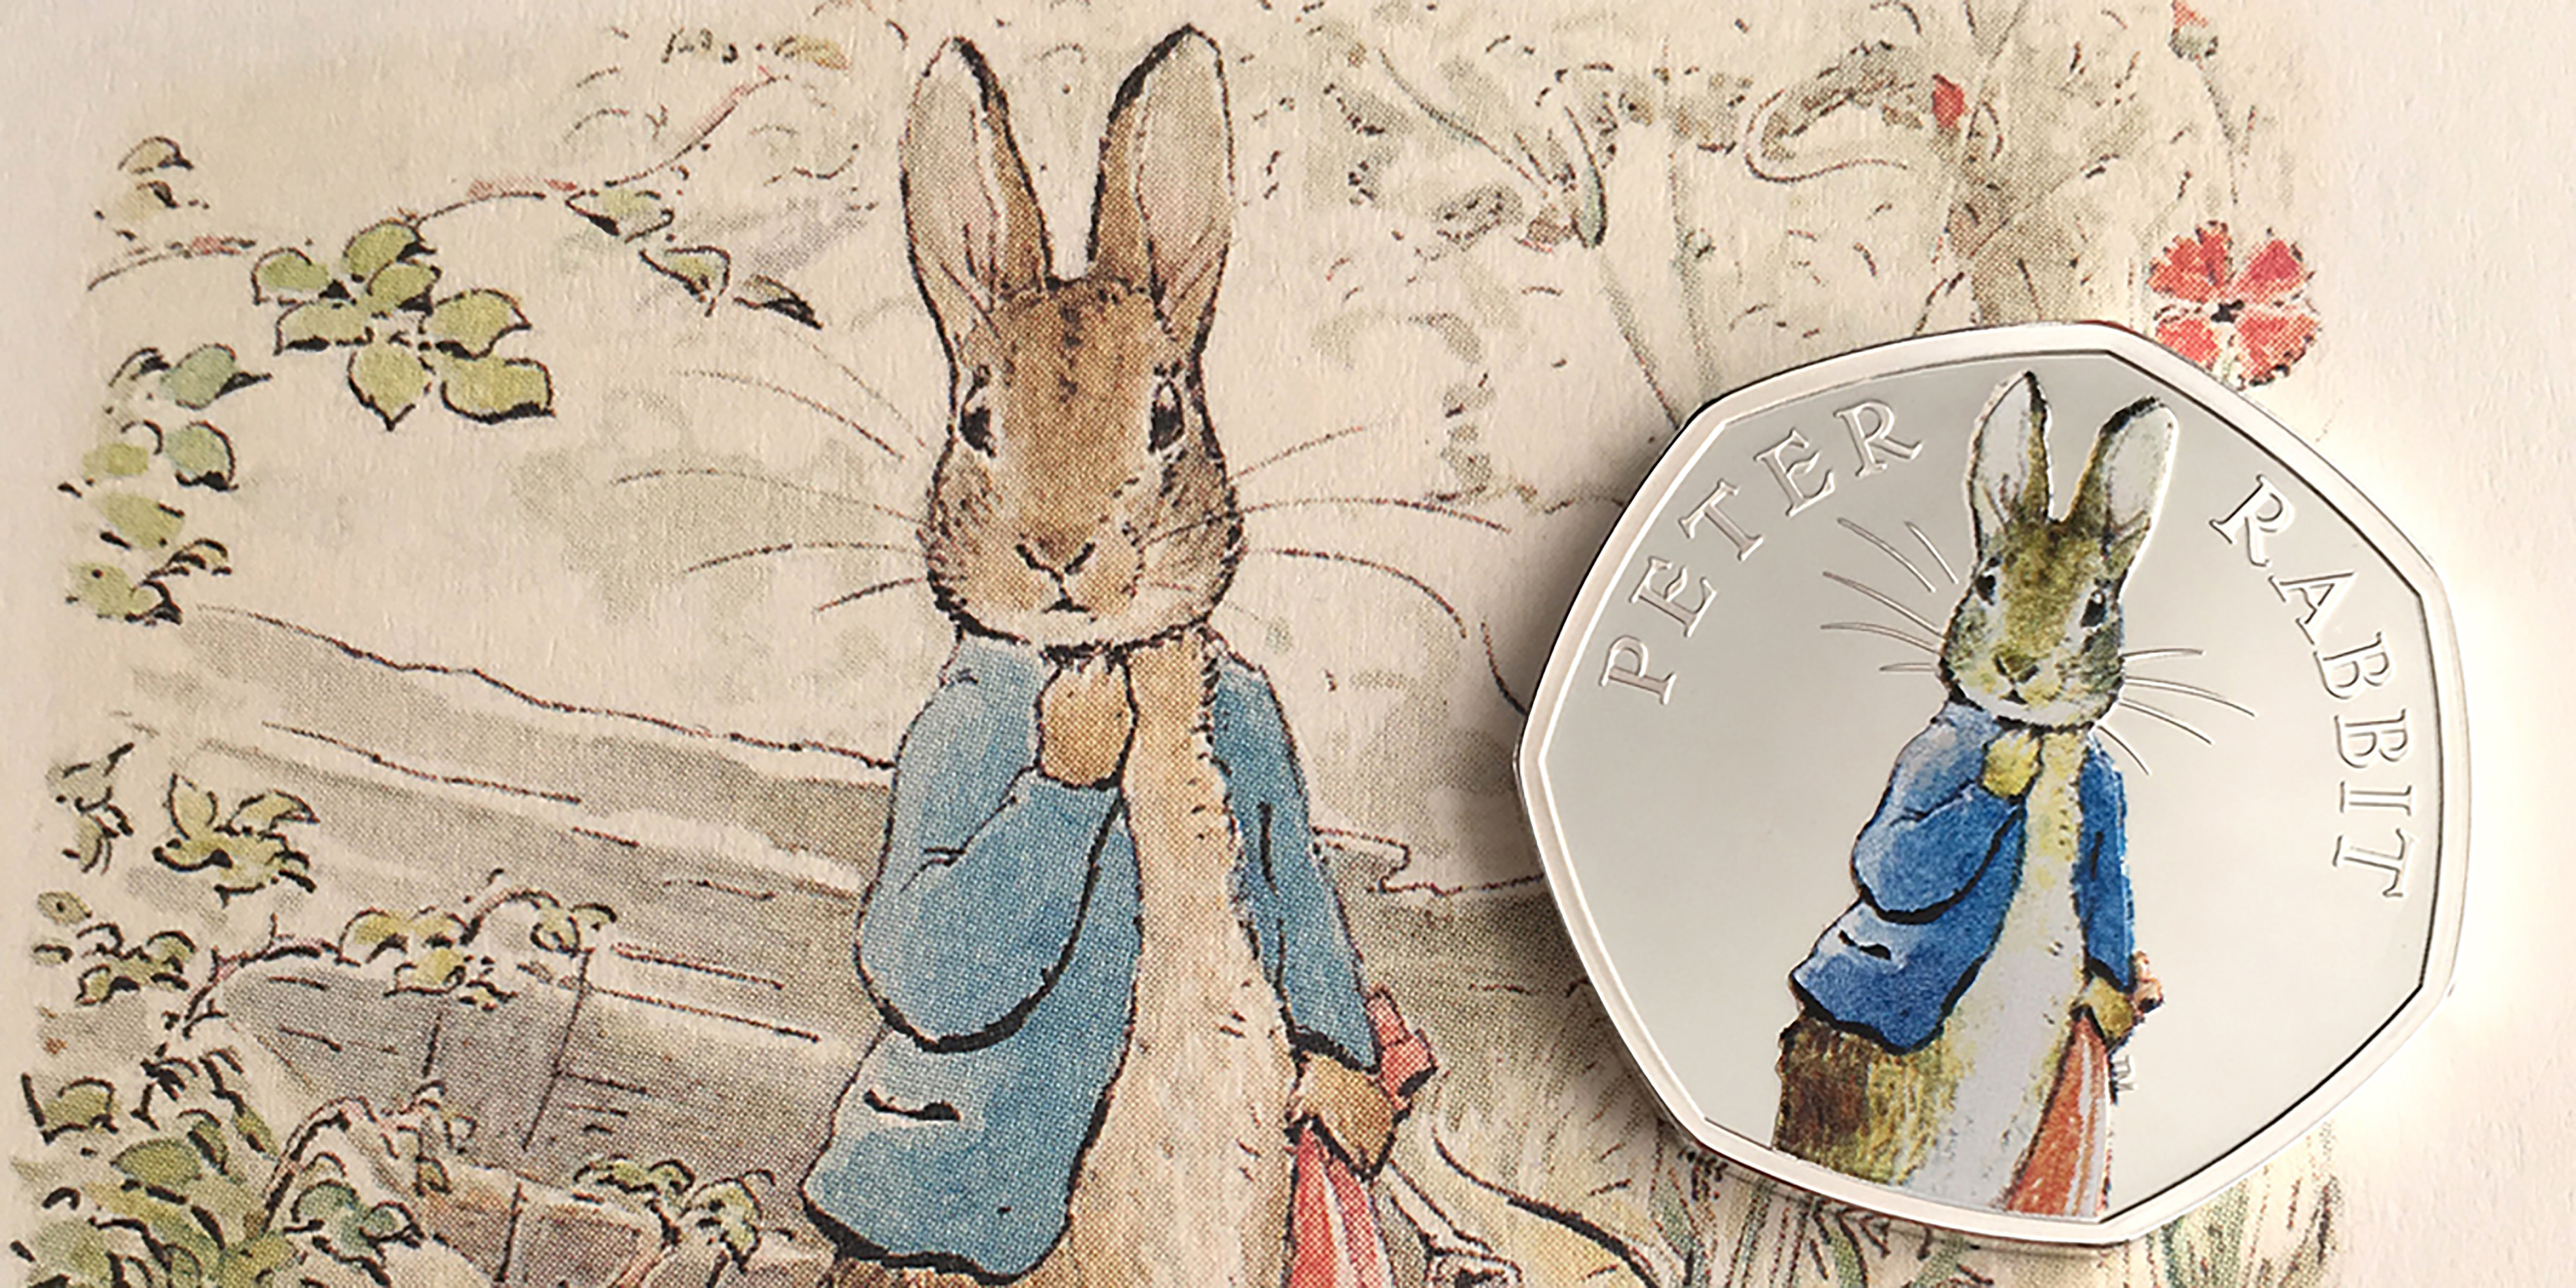 collectable 50p the tales of peter rabbit